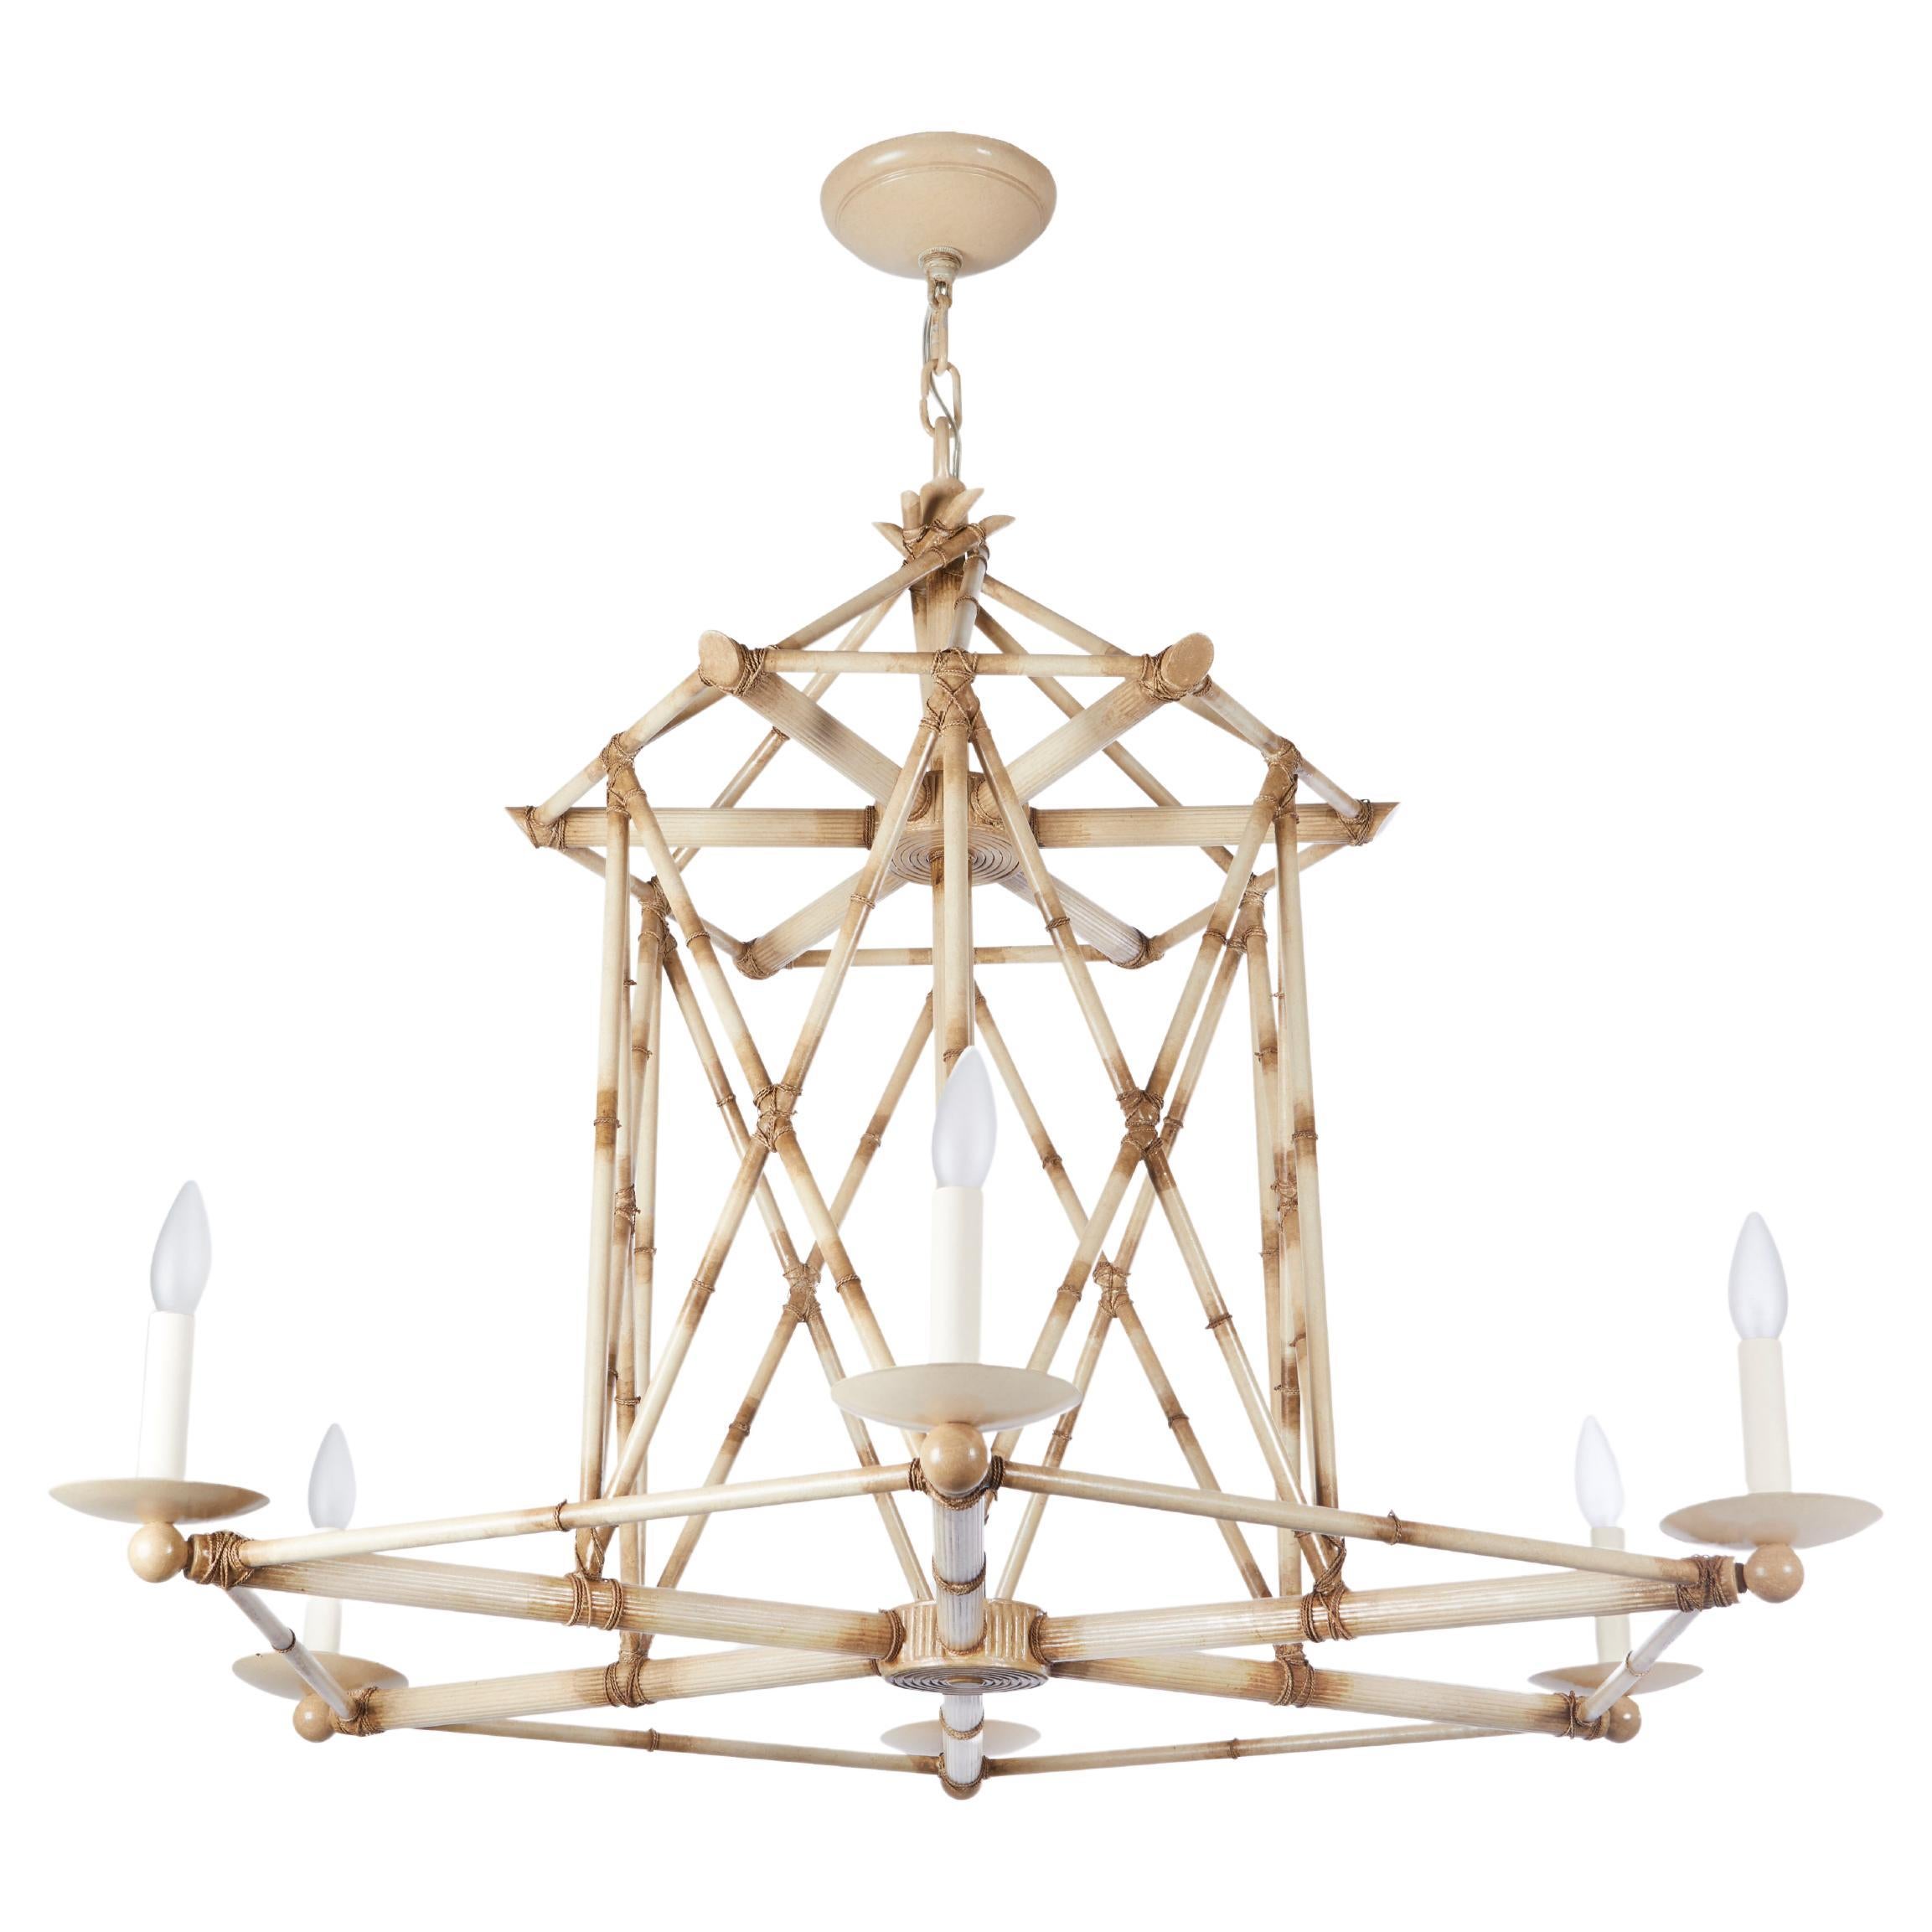 Six Light Bamboo Brûlé Chandelier Ceiling Light, Hand Painted Faux Bamboo For Sale